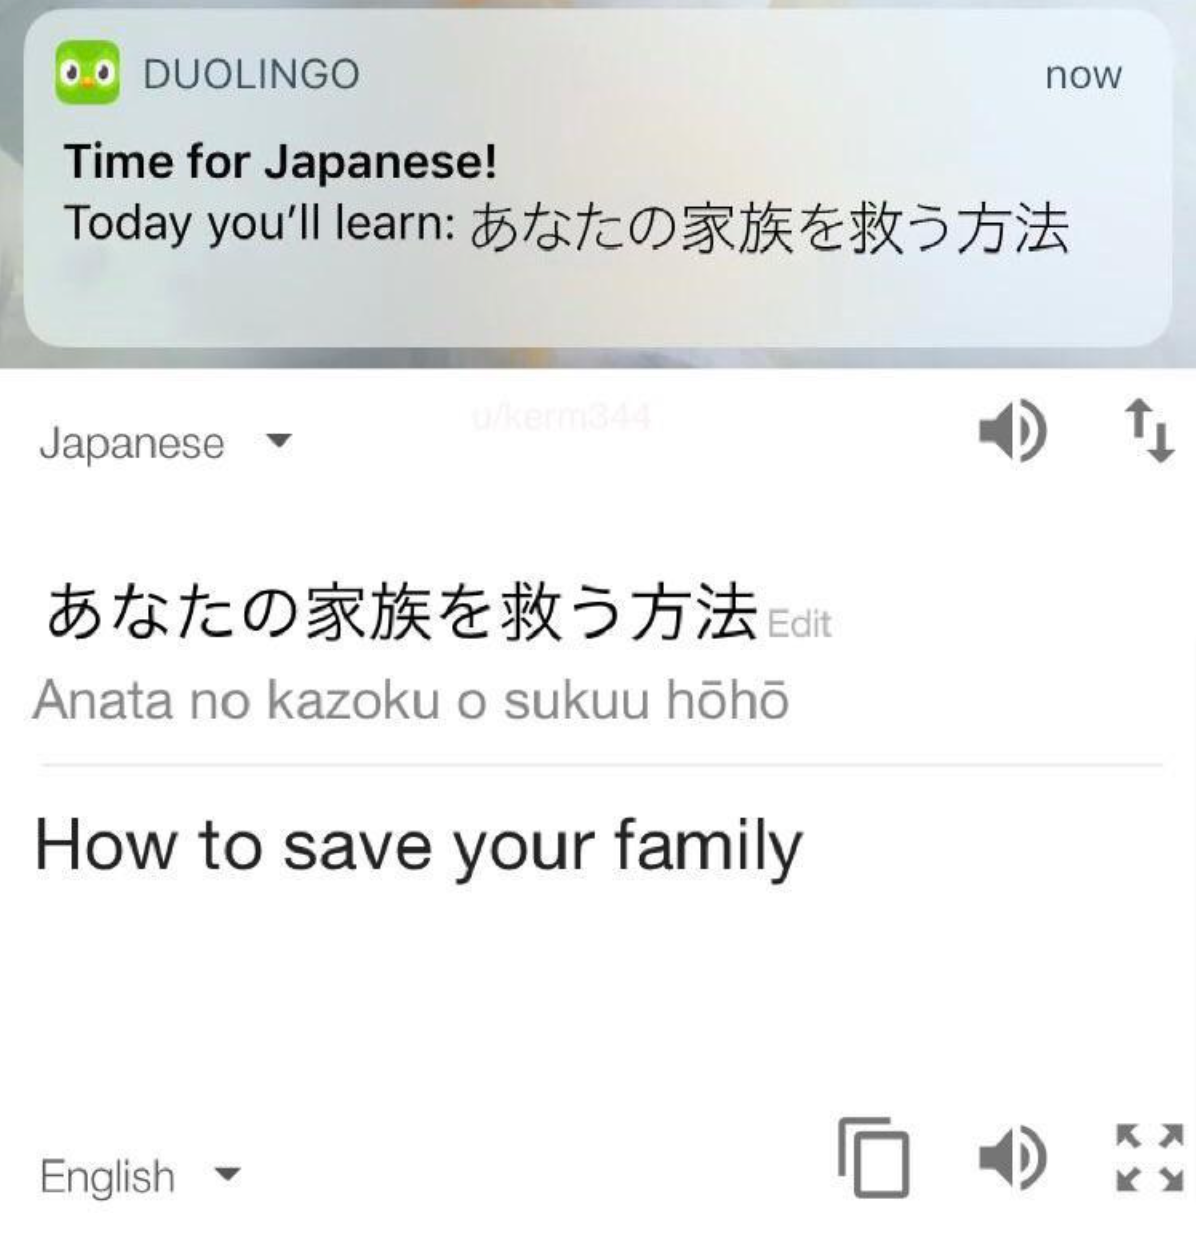 Meme text message from Duolingo that says &quot;How to save your family&quot; in Japanese